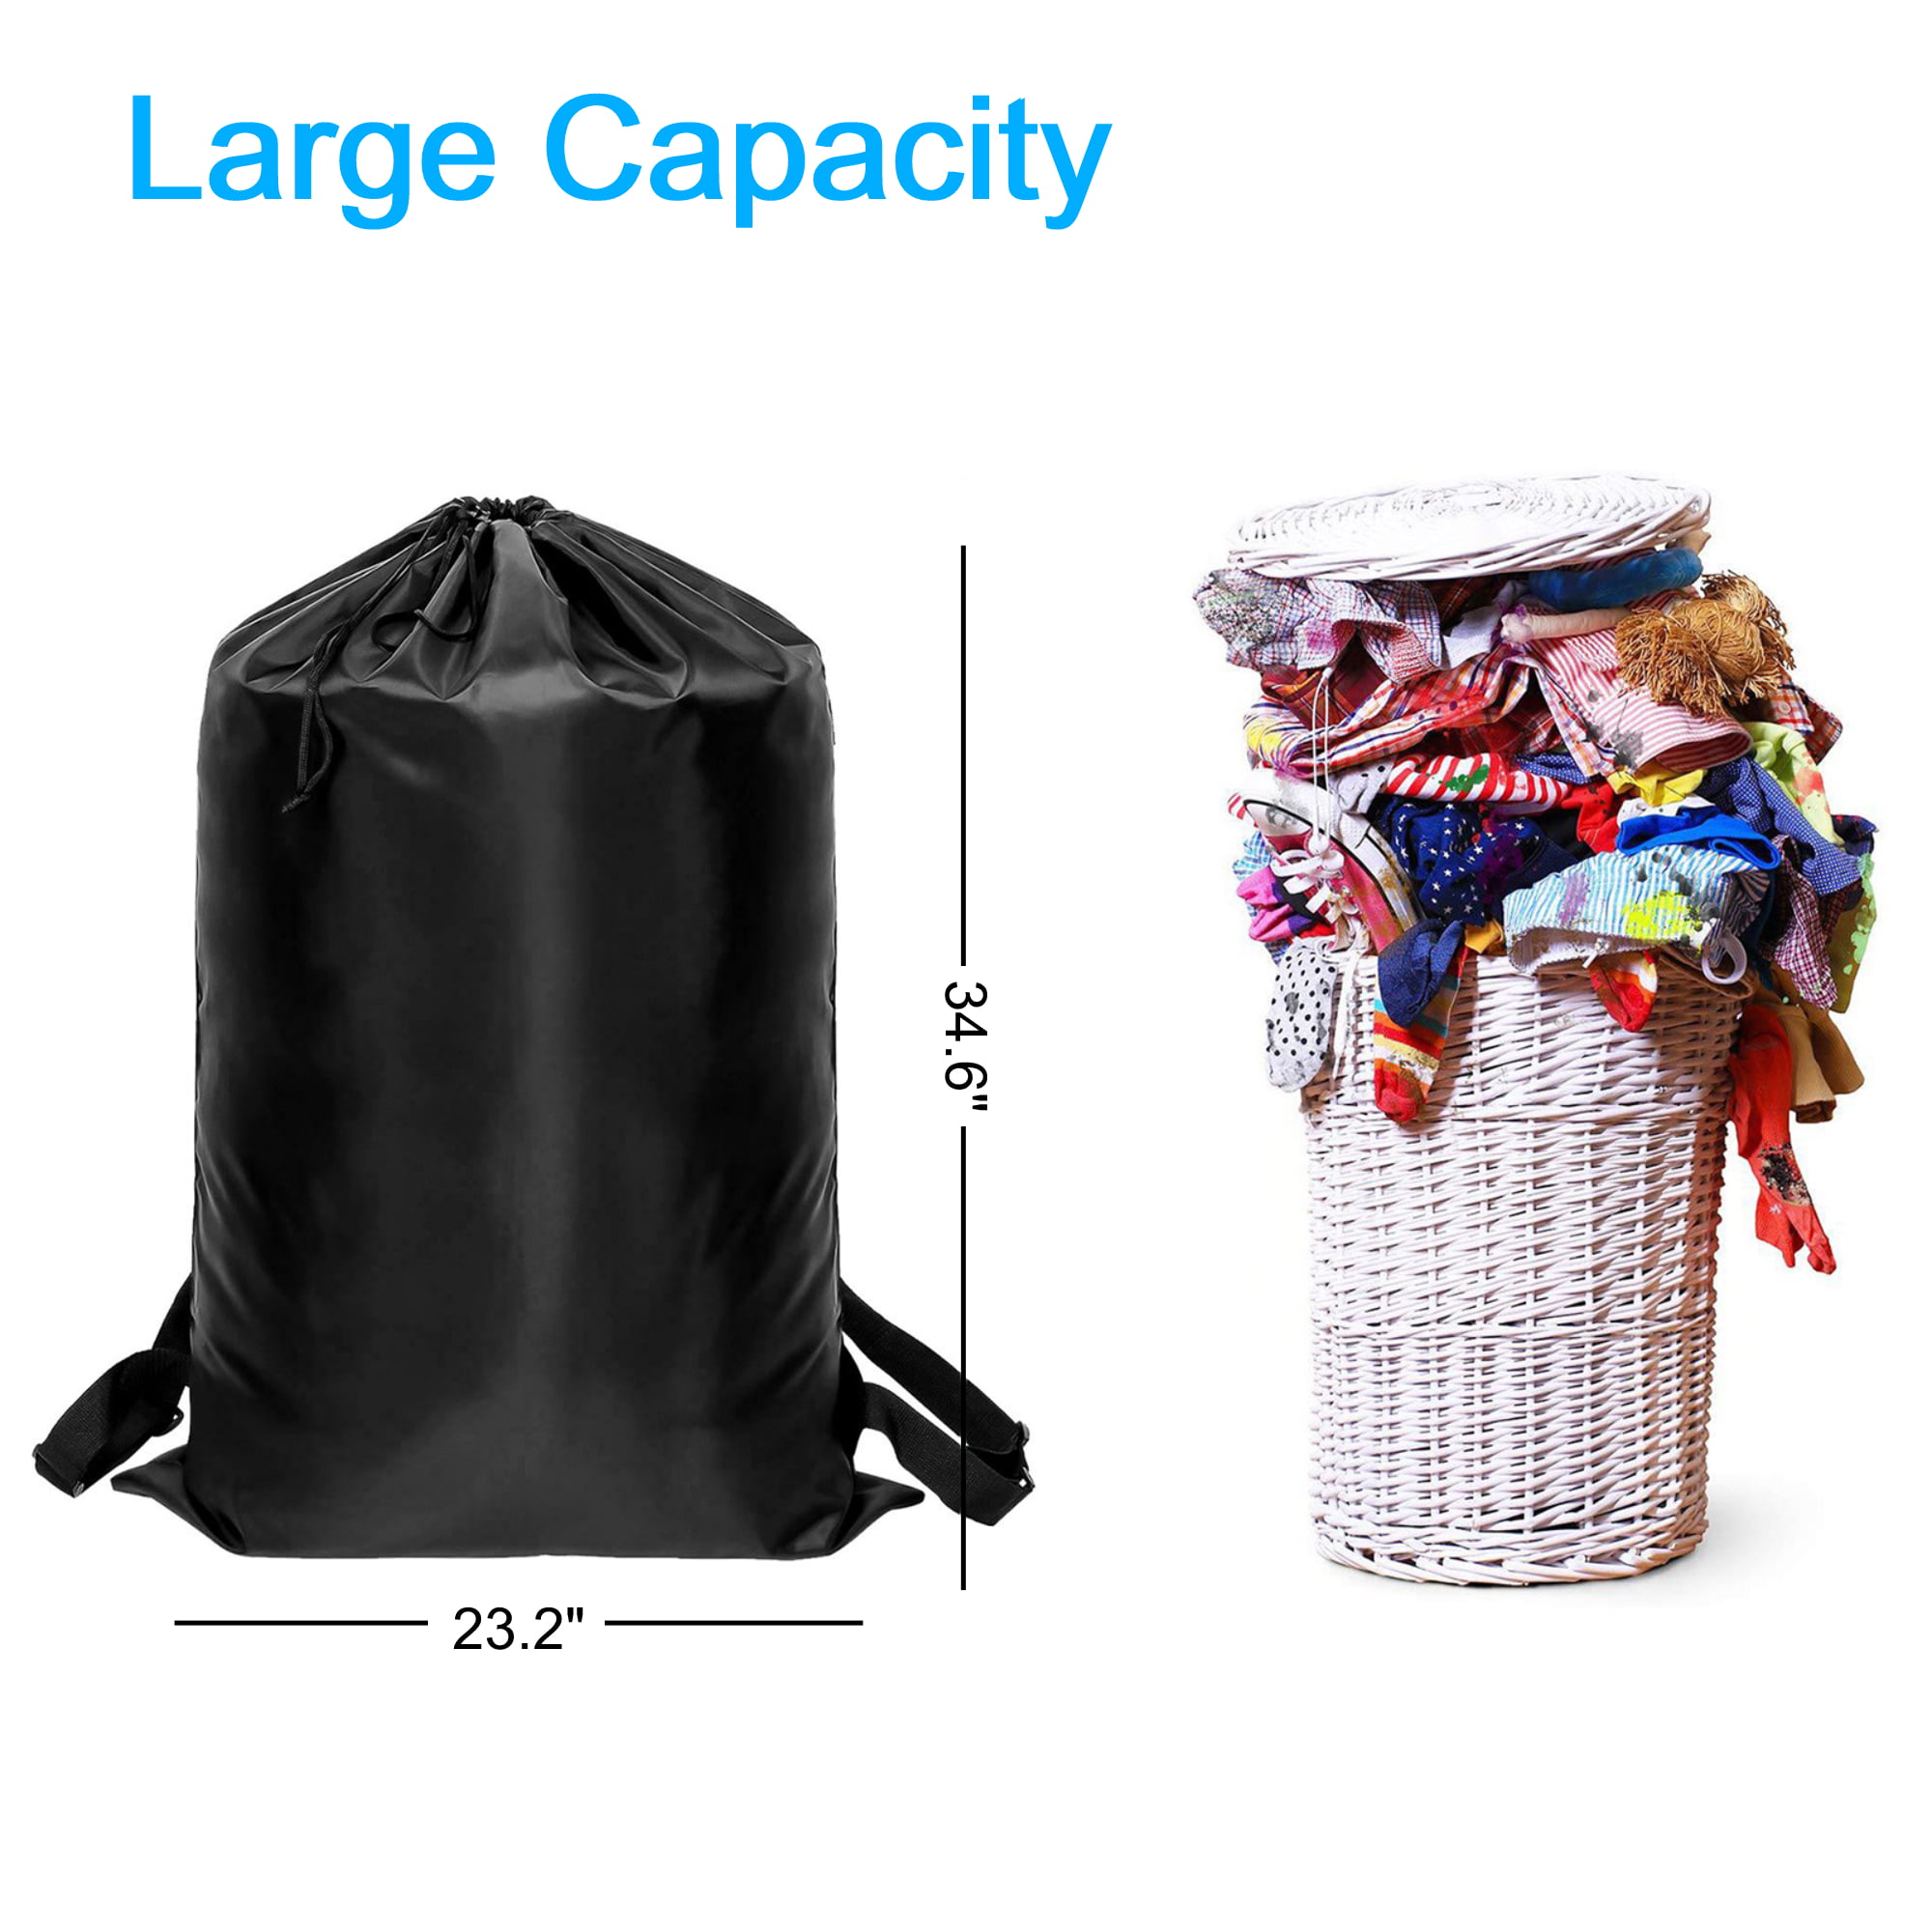 OUDXVEE Black Laundry Bag Backpack Extra Large 115L Durable Clothes Hamper with Adjustable Shoulder Straps and Drawstring Closure Heavy Duty Laundromat Bag